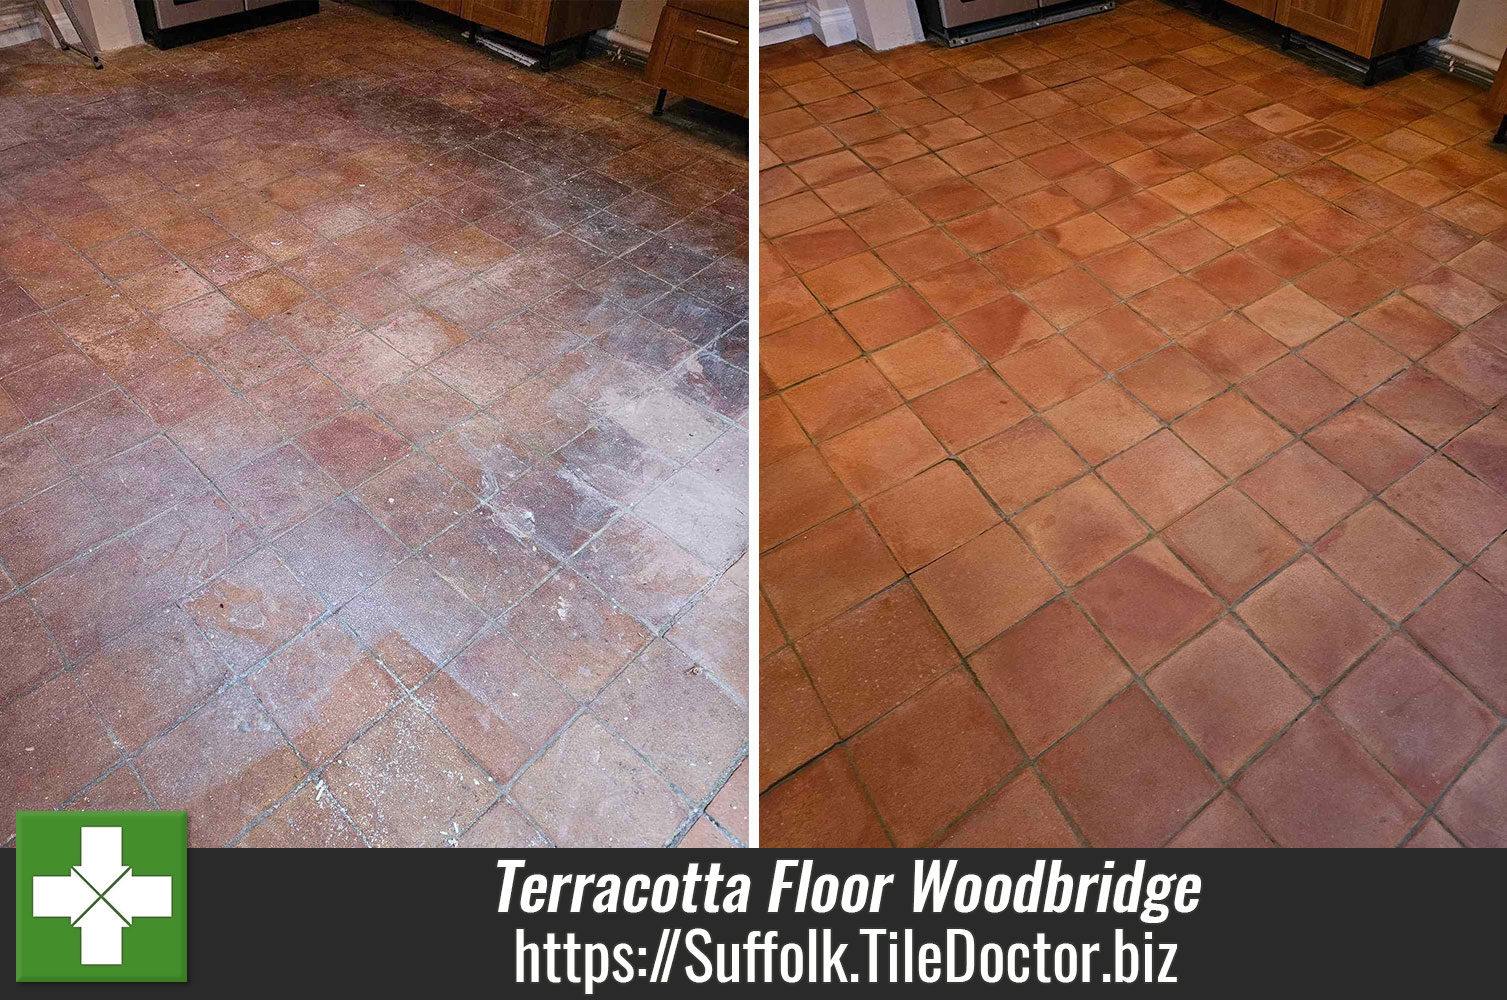 Five litres of Pro-Clean used Cleaning a Very Dirty Terracotta Floor in Woodbridge